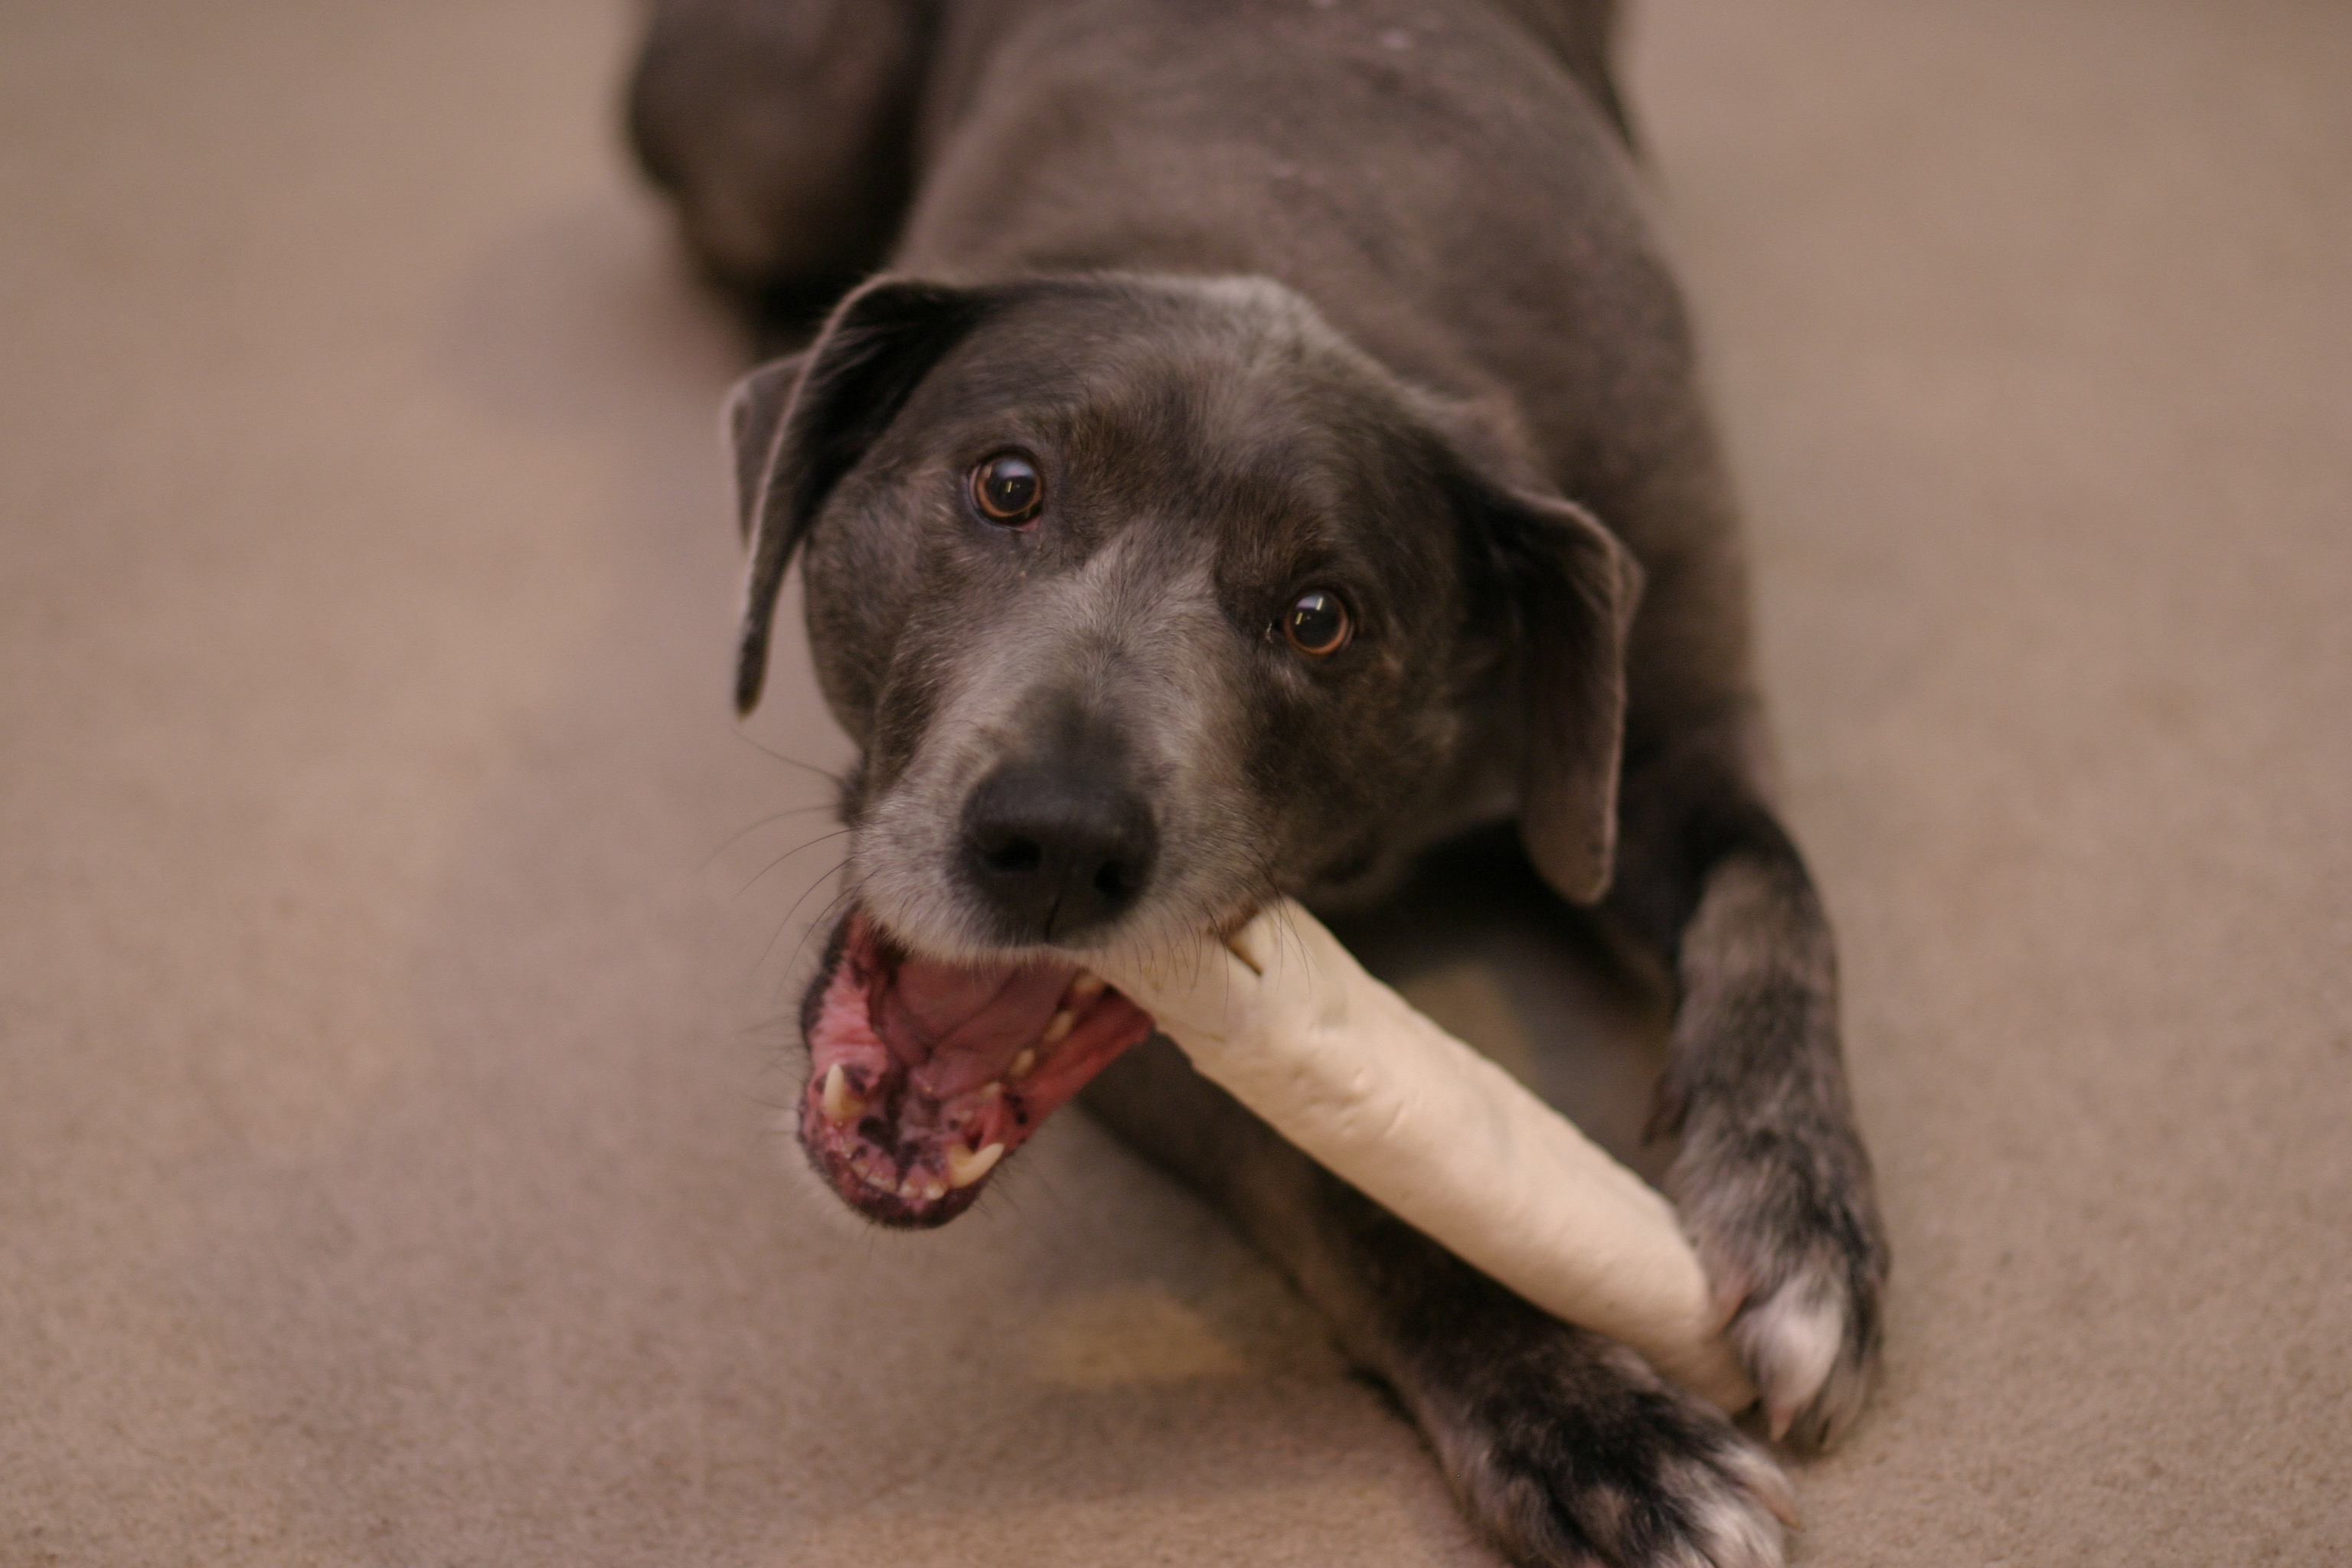 A close-up image of a dog biting a toy or a bone.